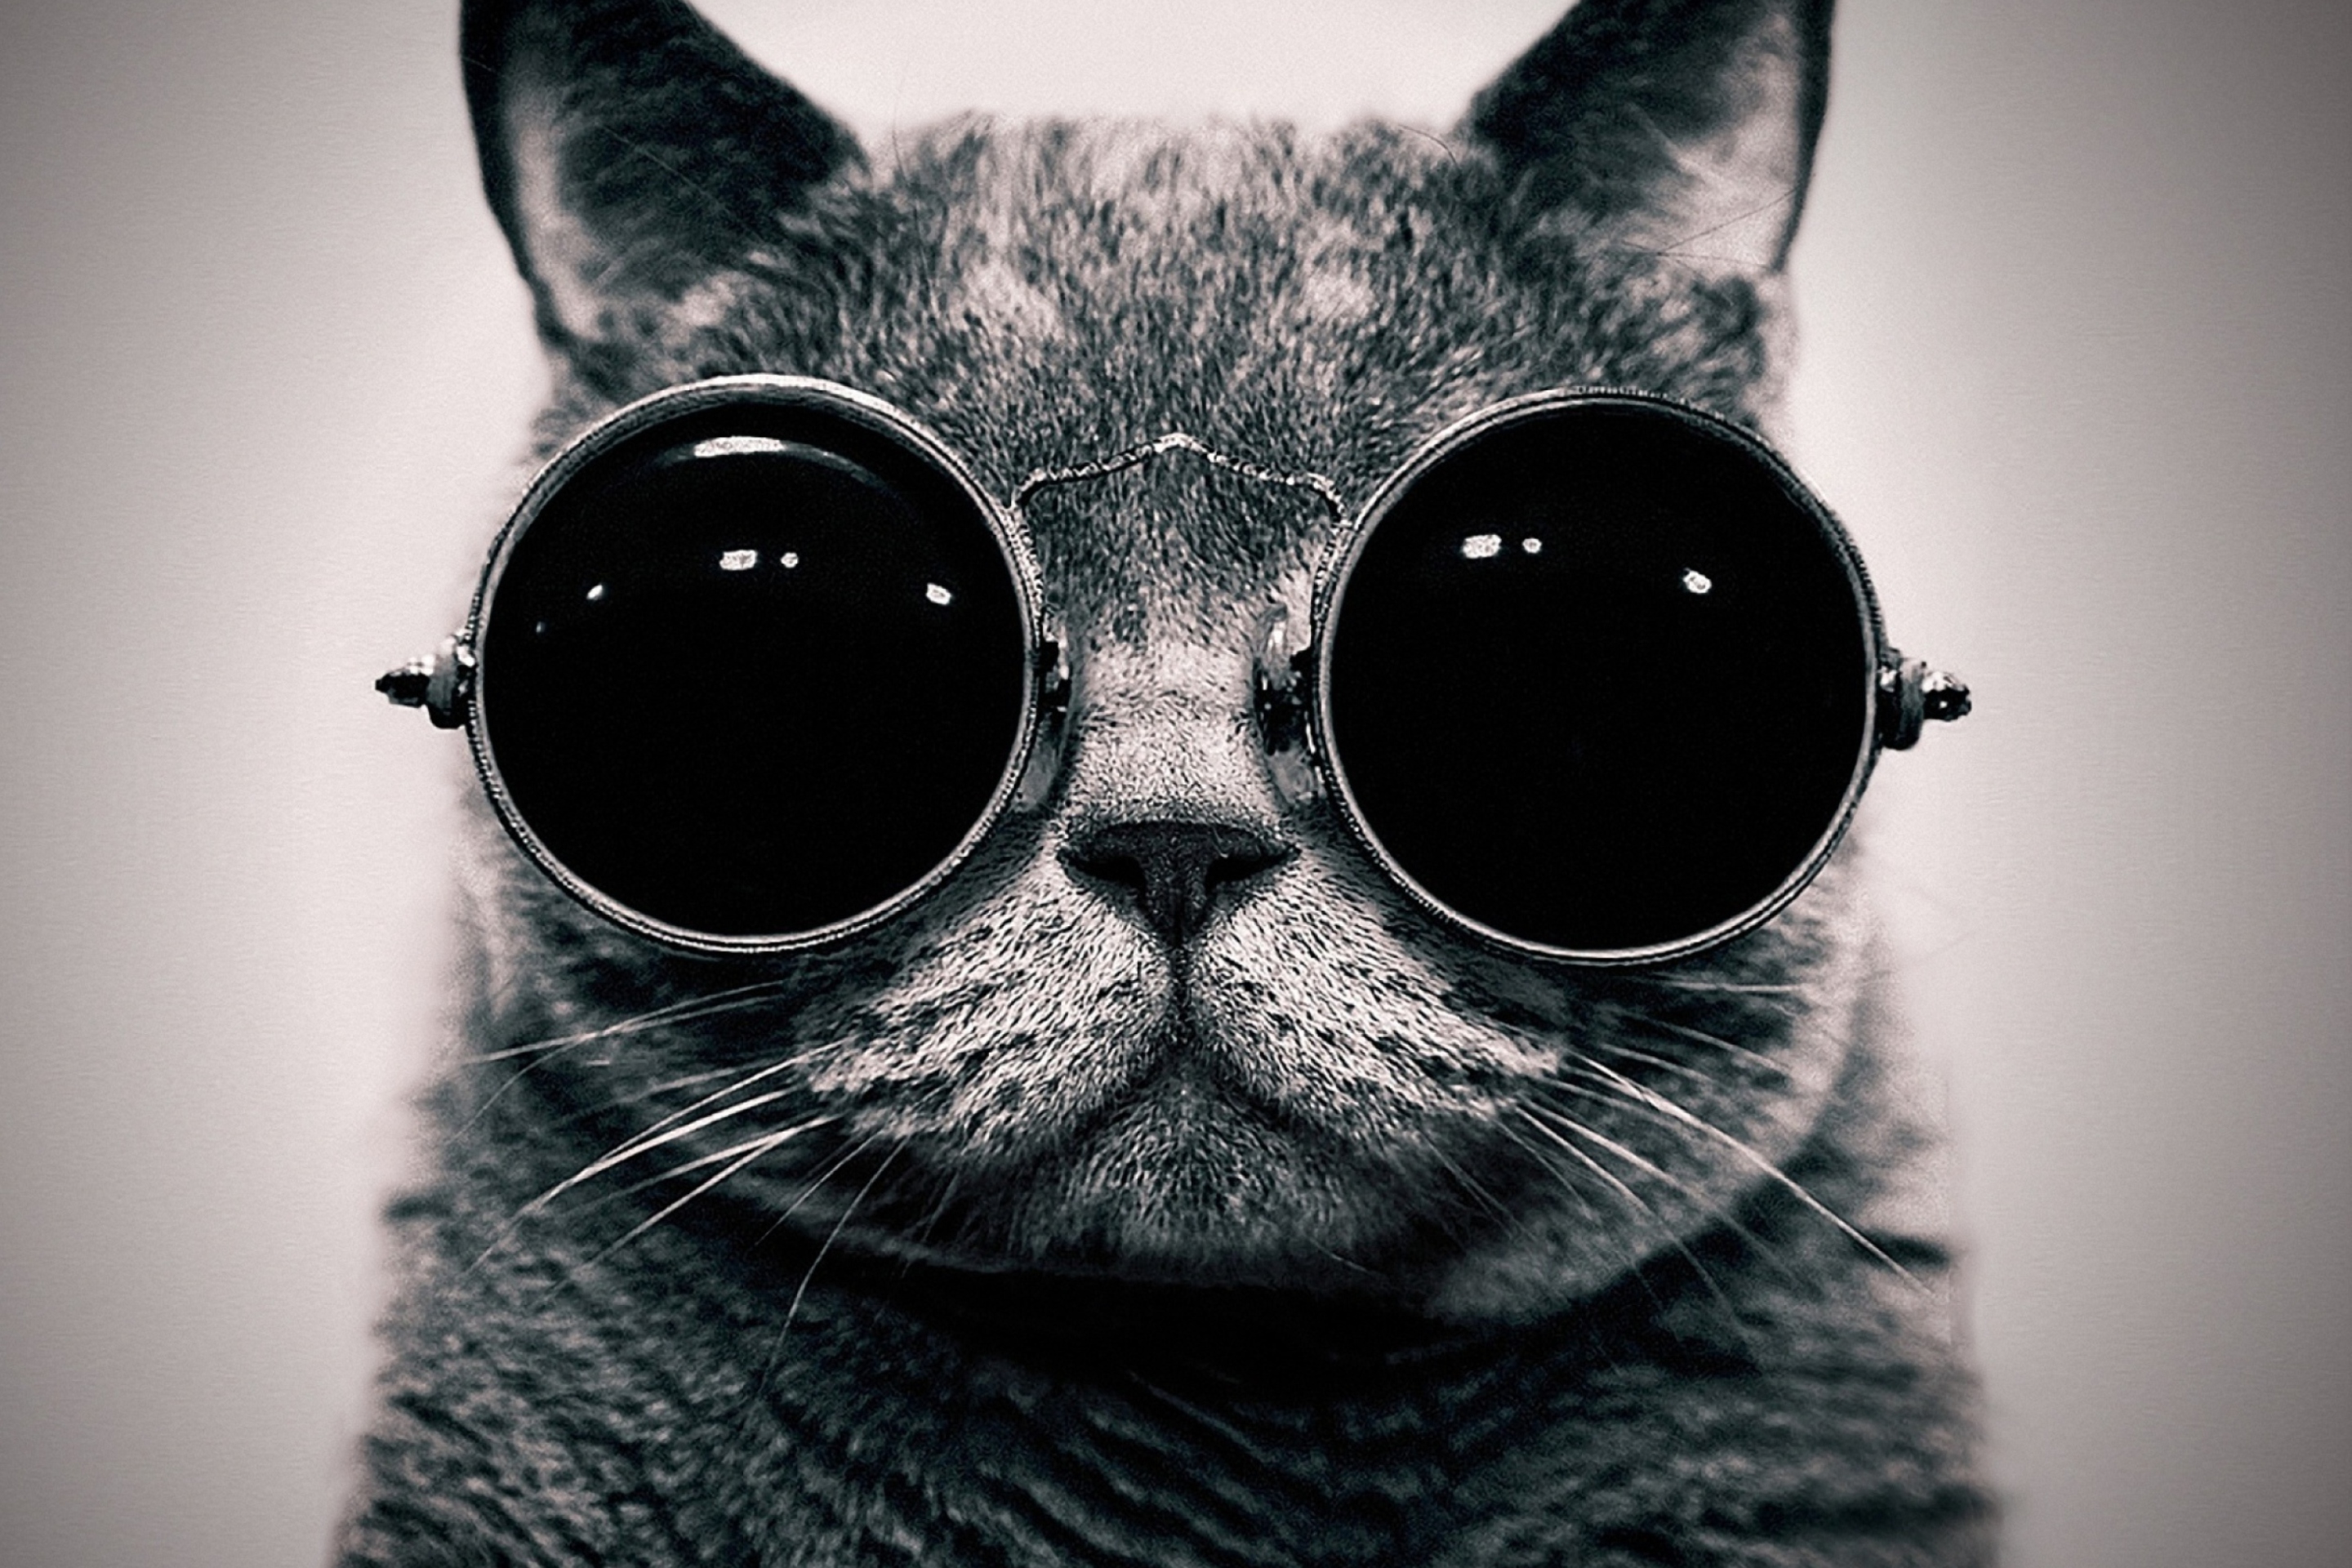 Cat With Glasses wallpaper 2880x1920